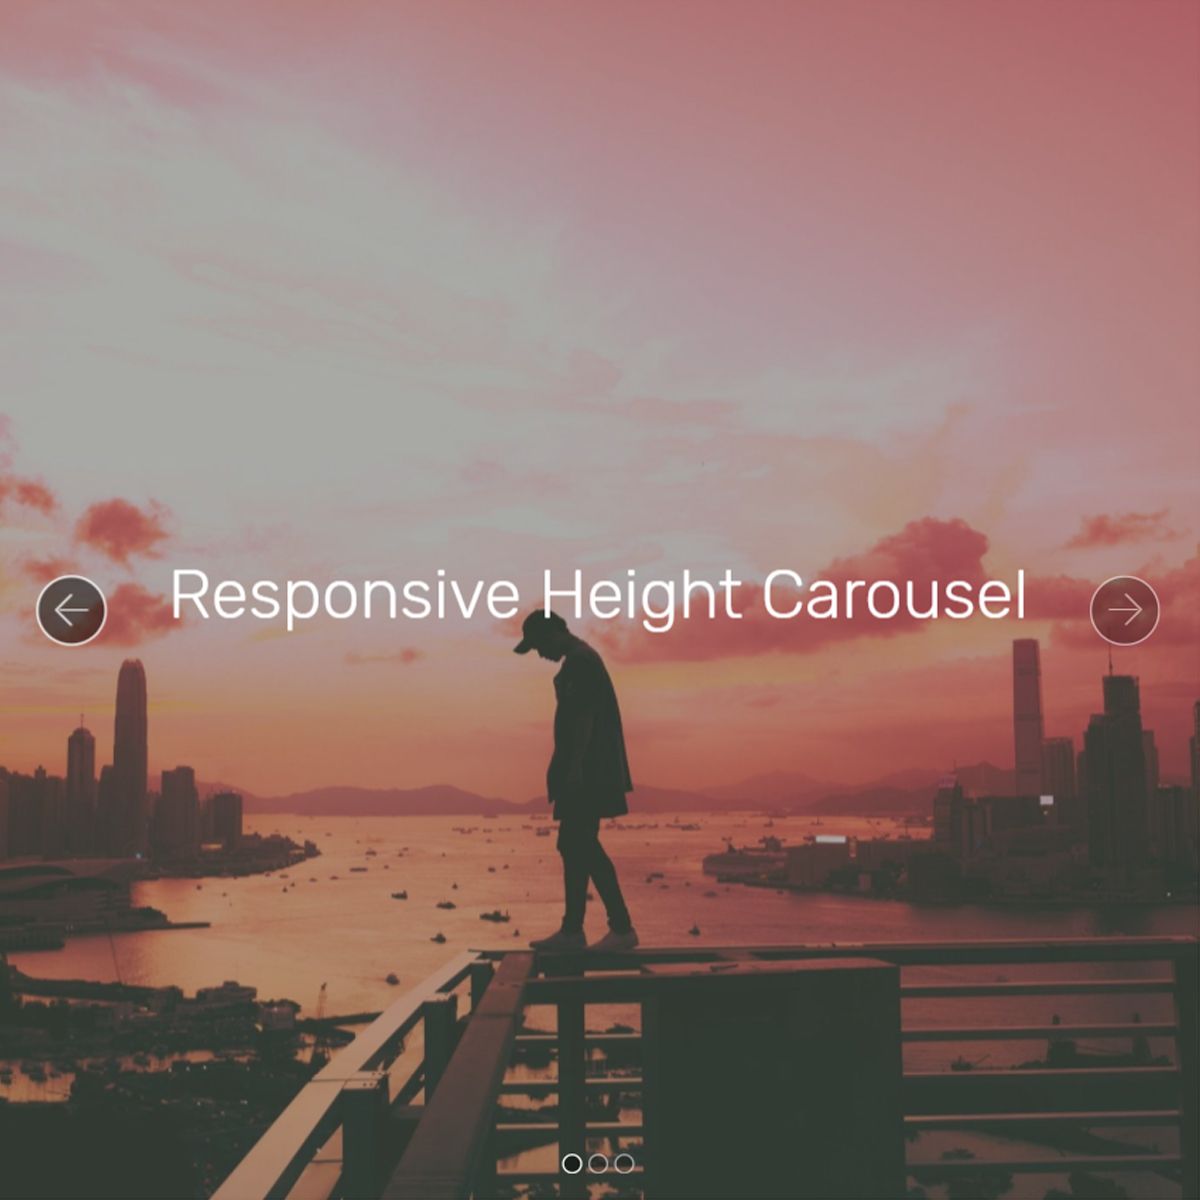 Mobile Bootstrap Image Carousel